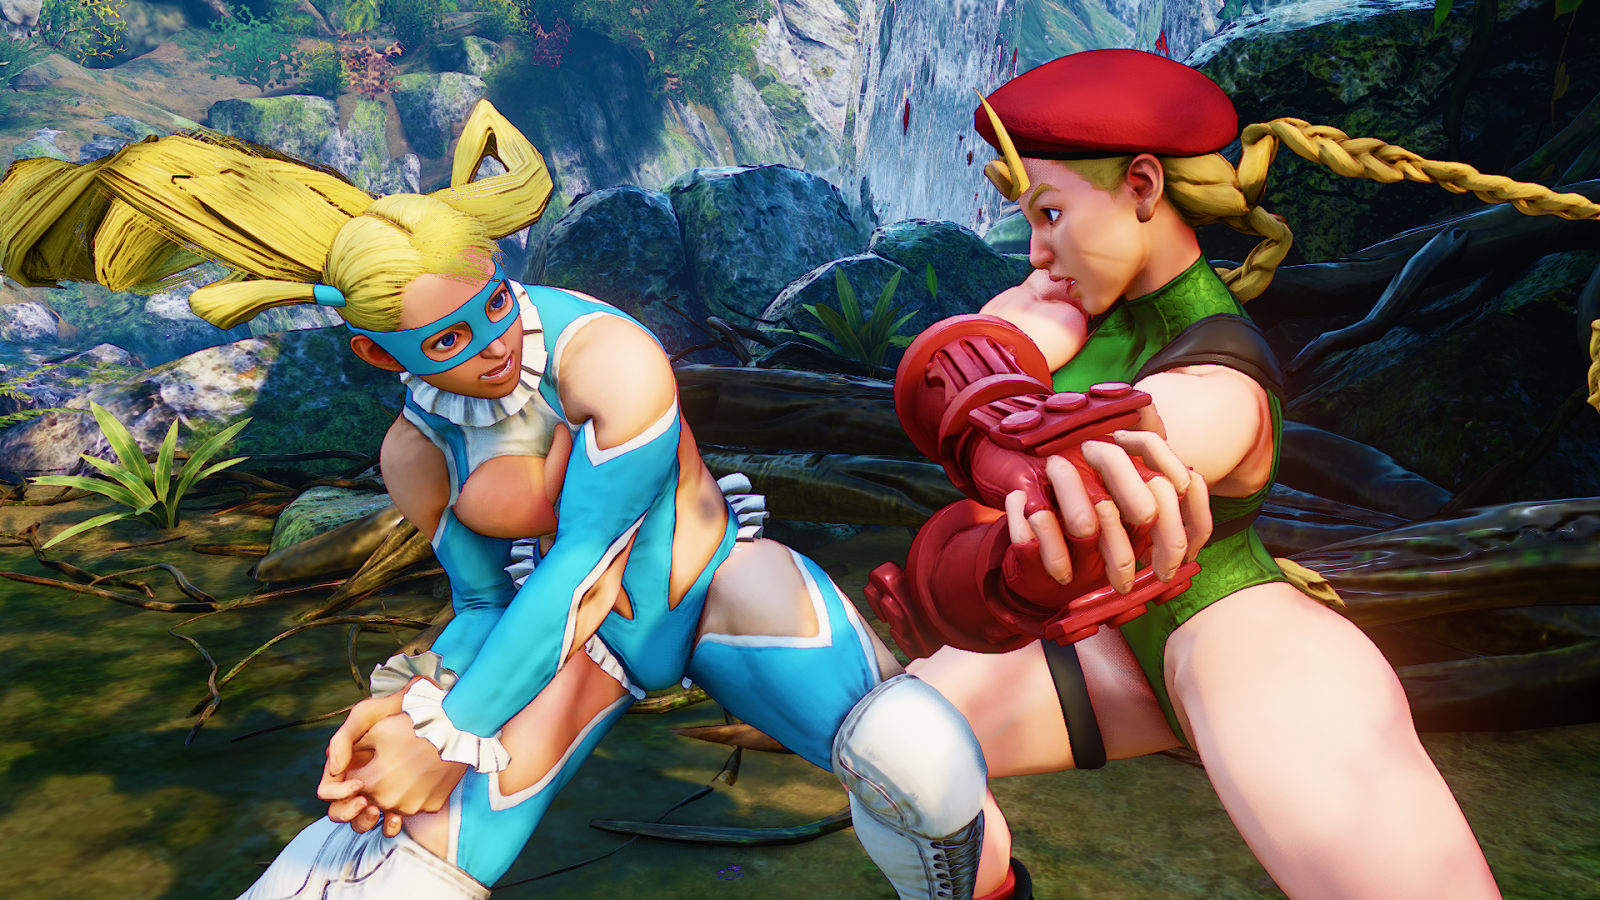 Street Fighter 5 Players Are Divided Over R. Mika’s Unusually Powerful Dash